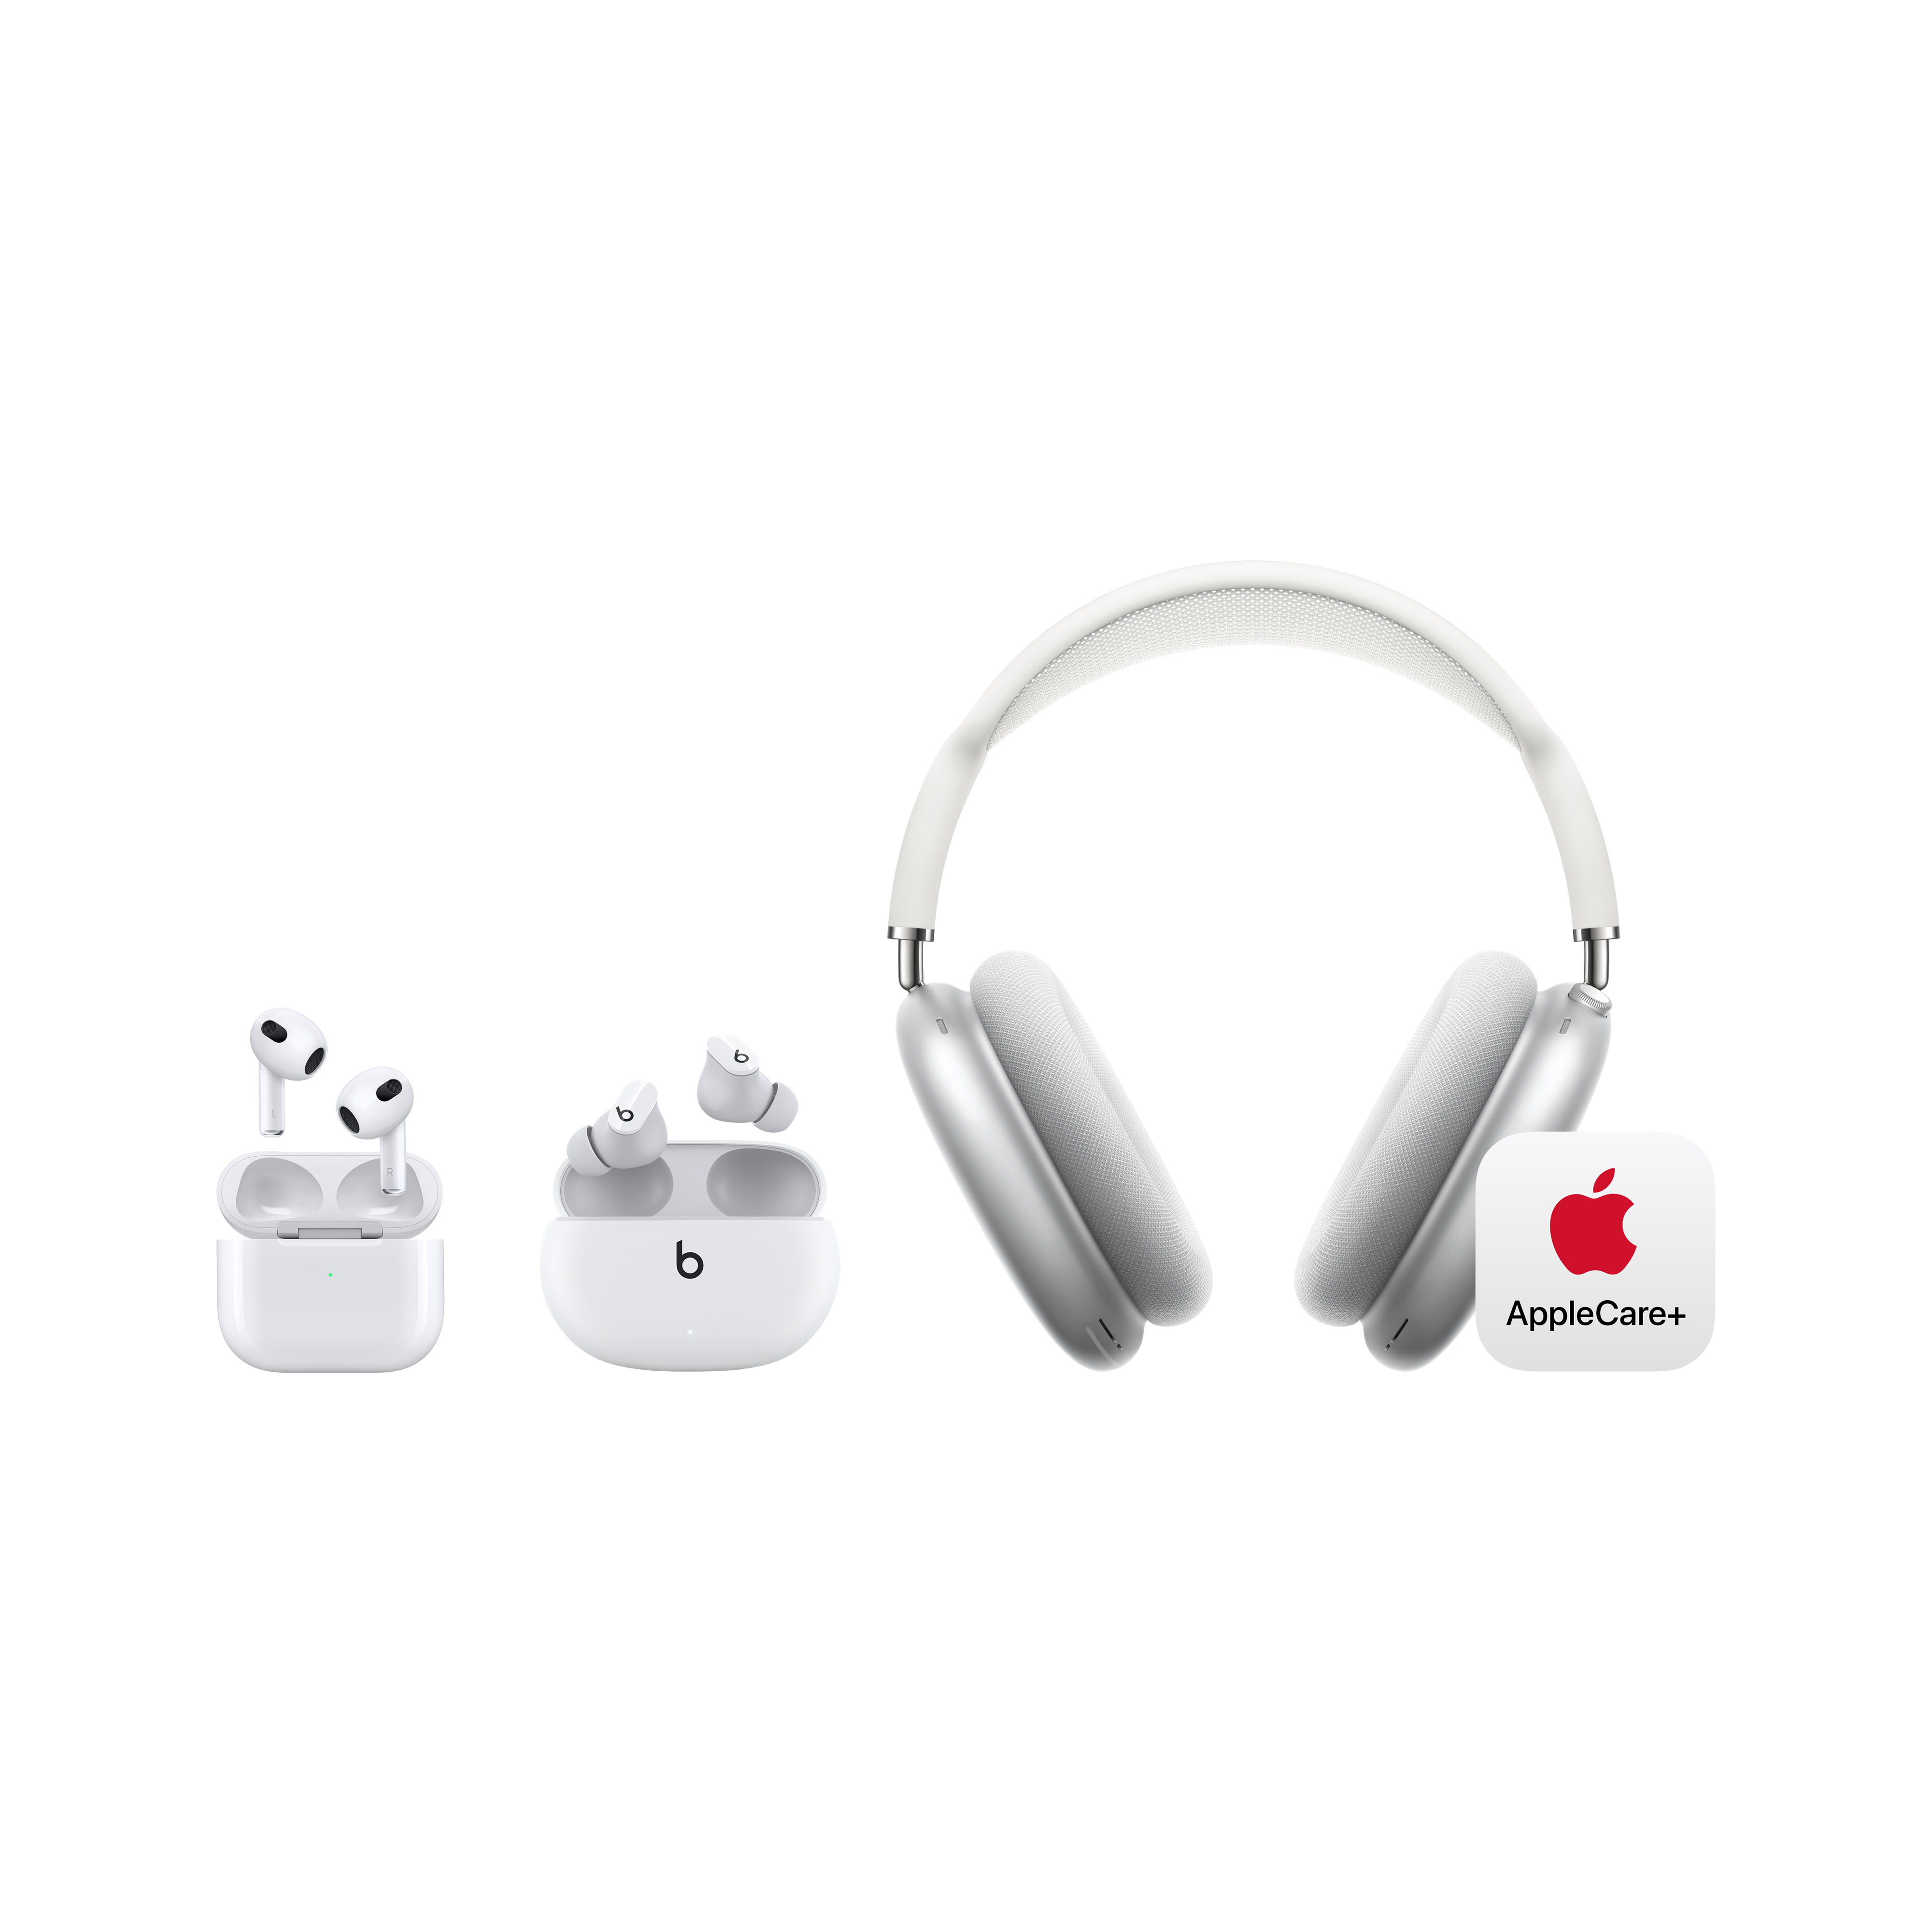 AppleCare+(Airpods Max)